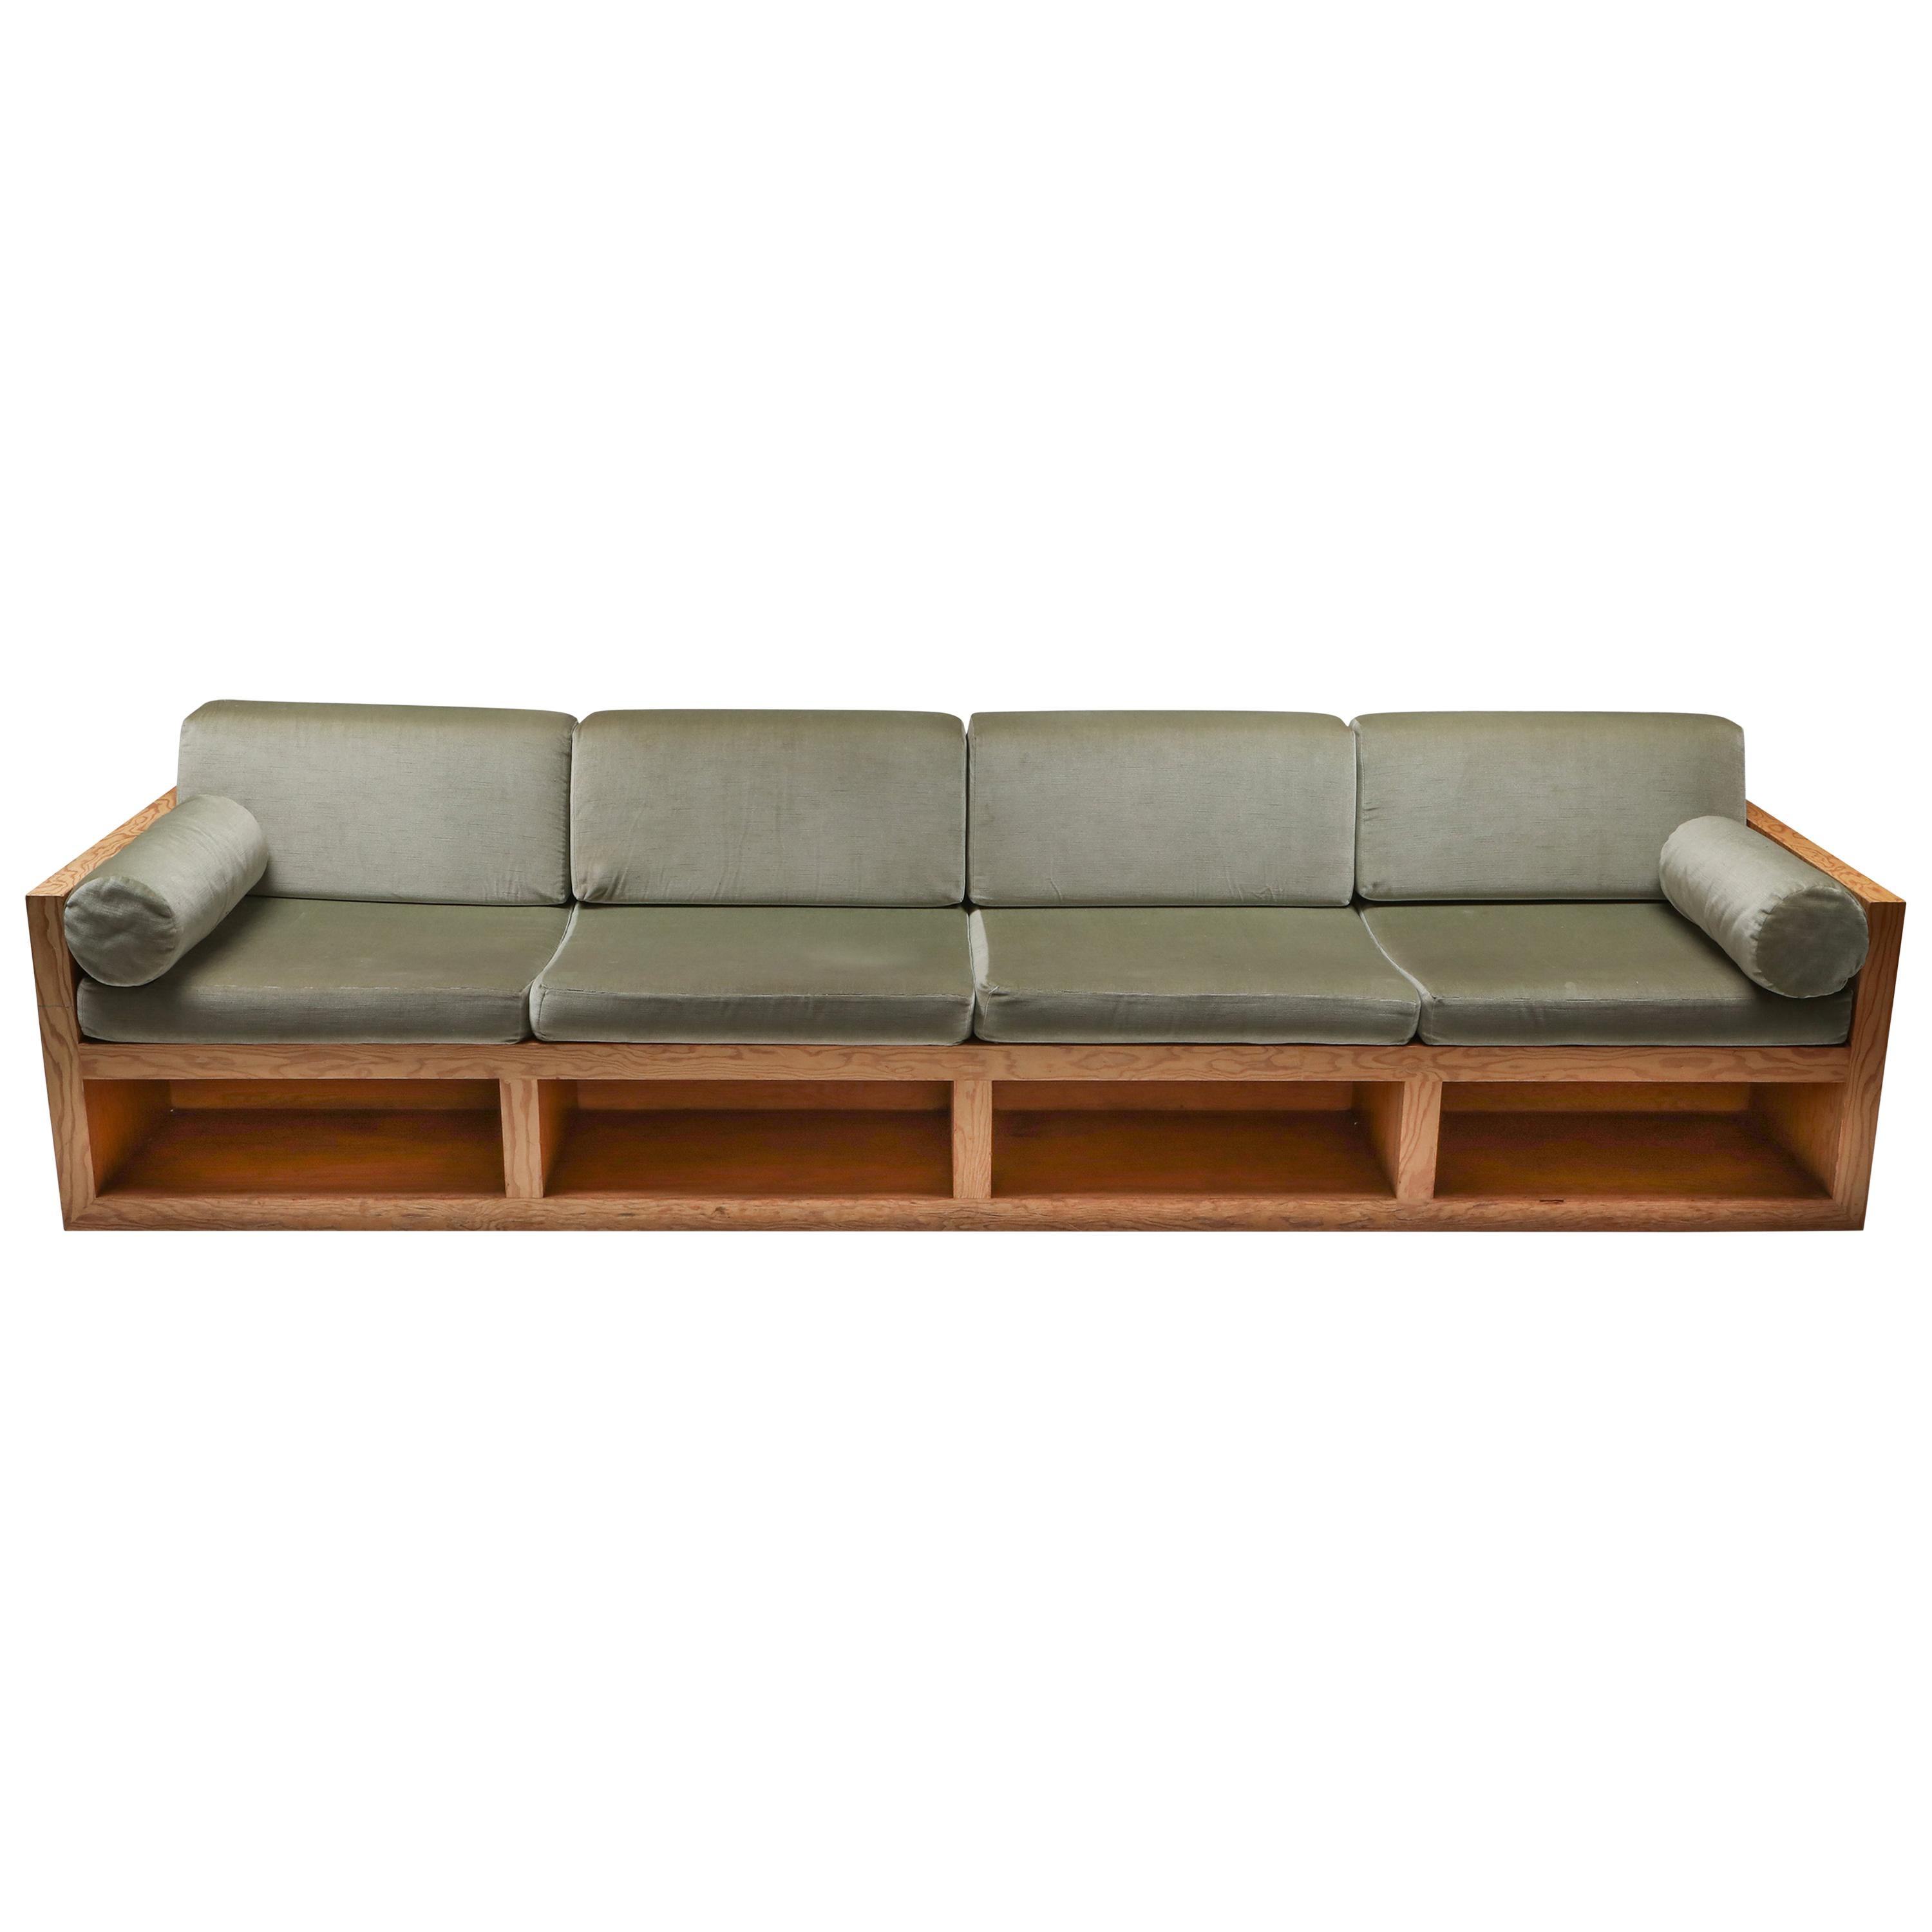 Mid-Century Modern Sofa in Pitch Pine and Velvet